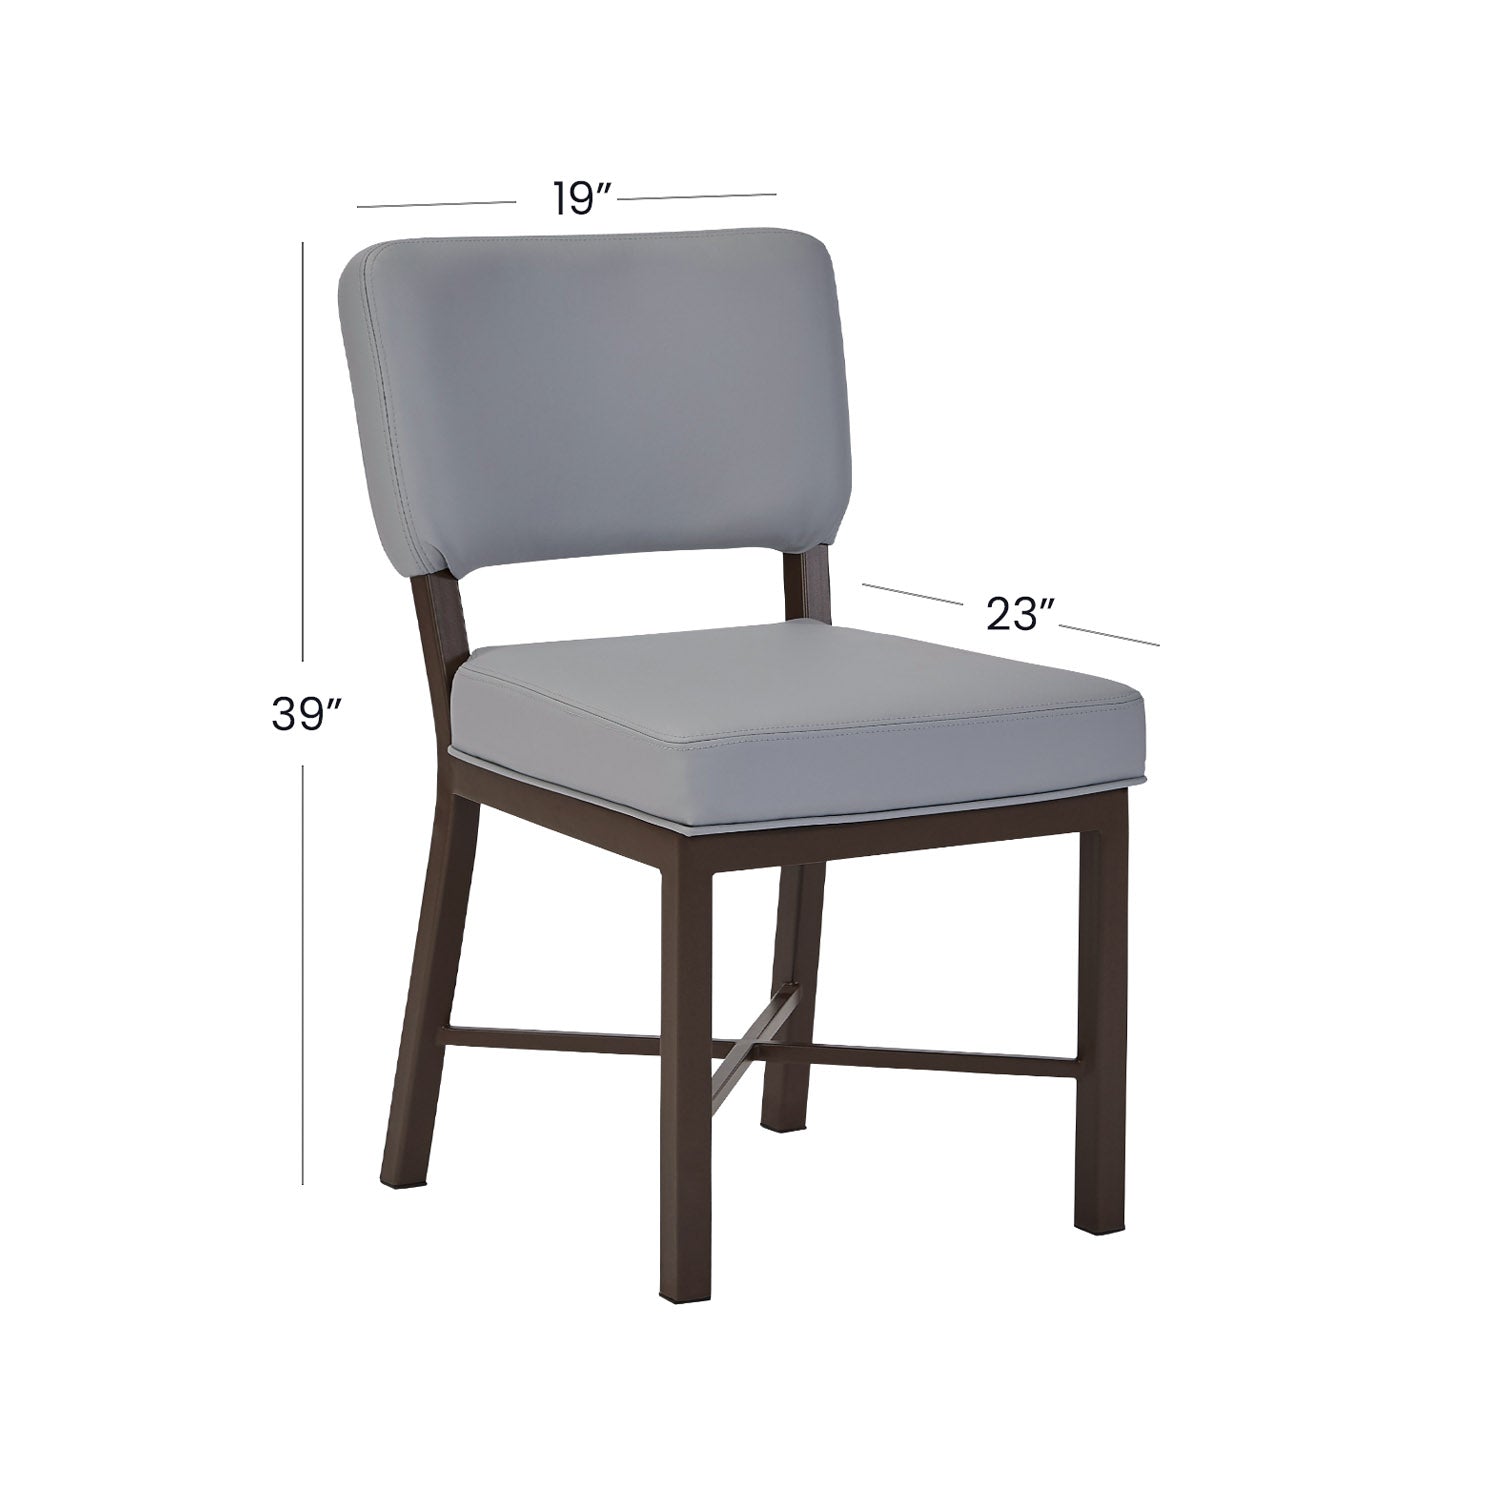 Wesley Allen Miami Chair with Dillon Steel Vinyl in Caapucino Finish. Dimensions